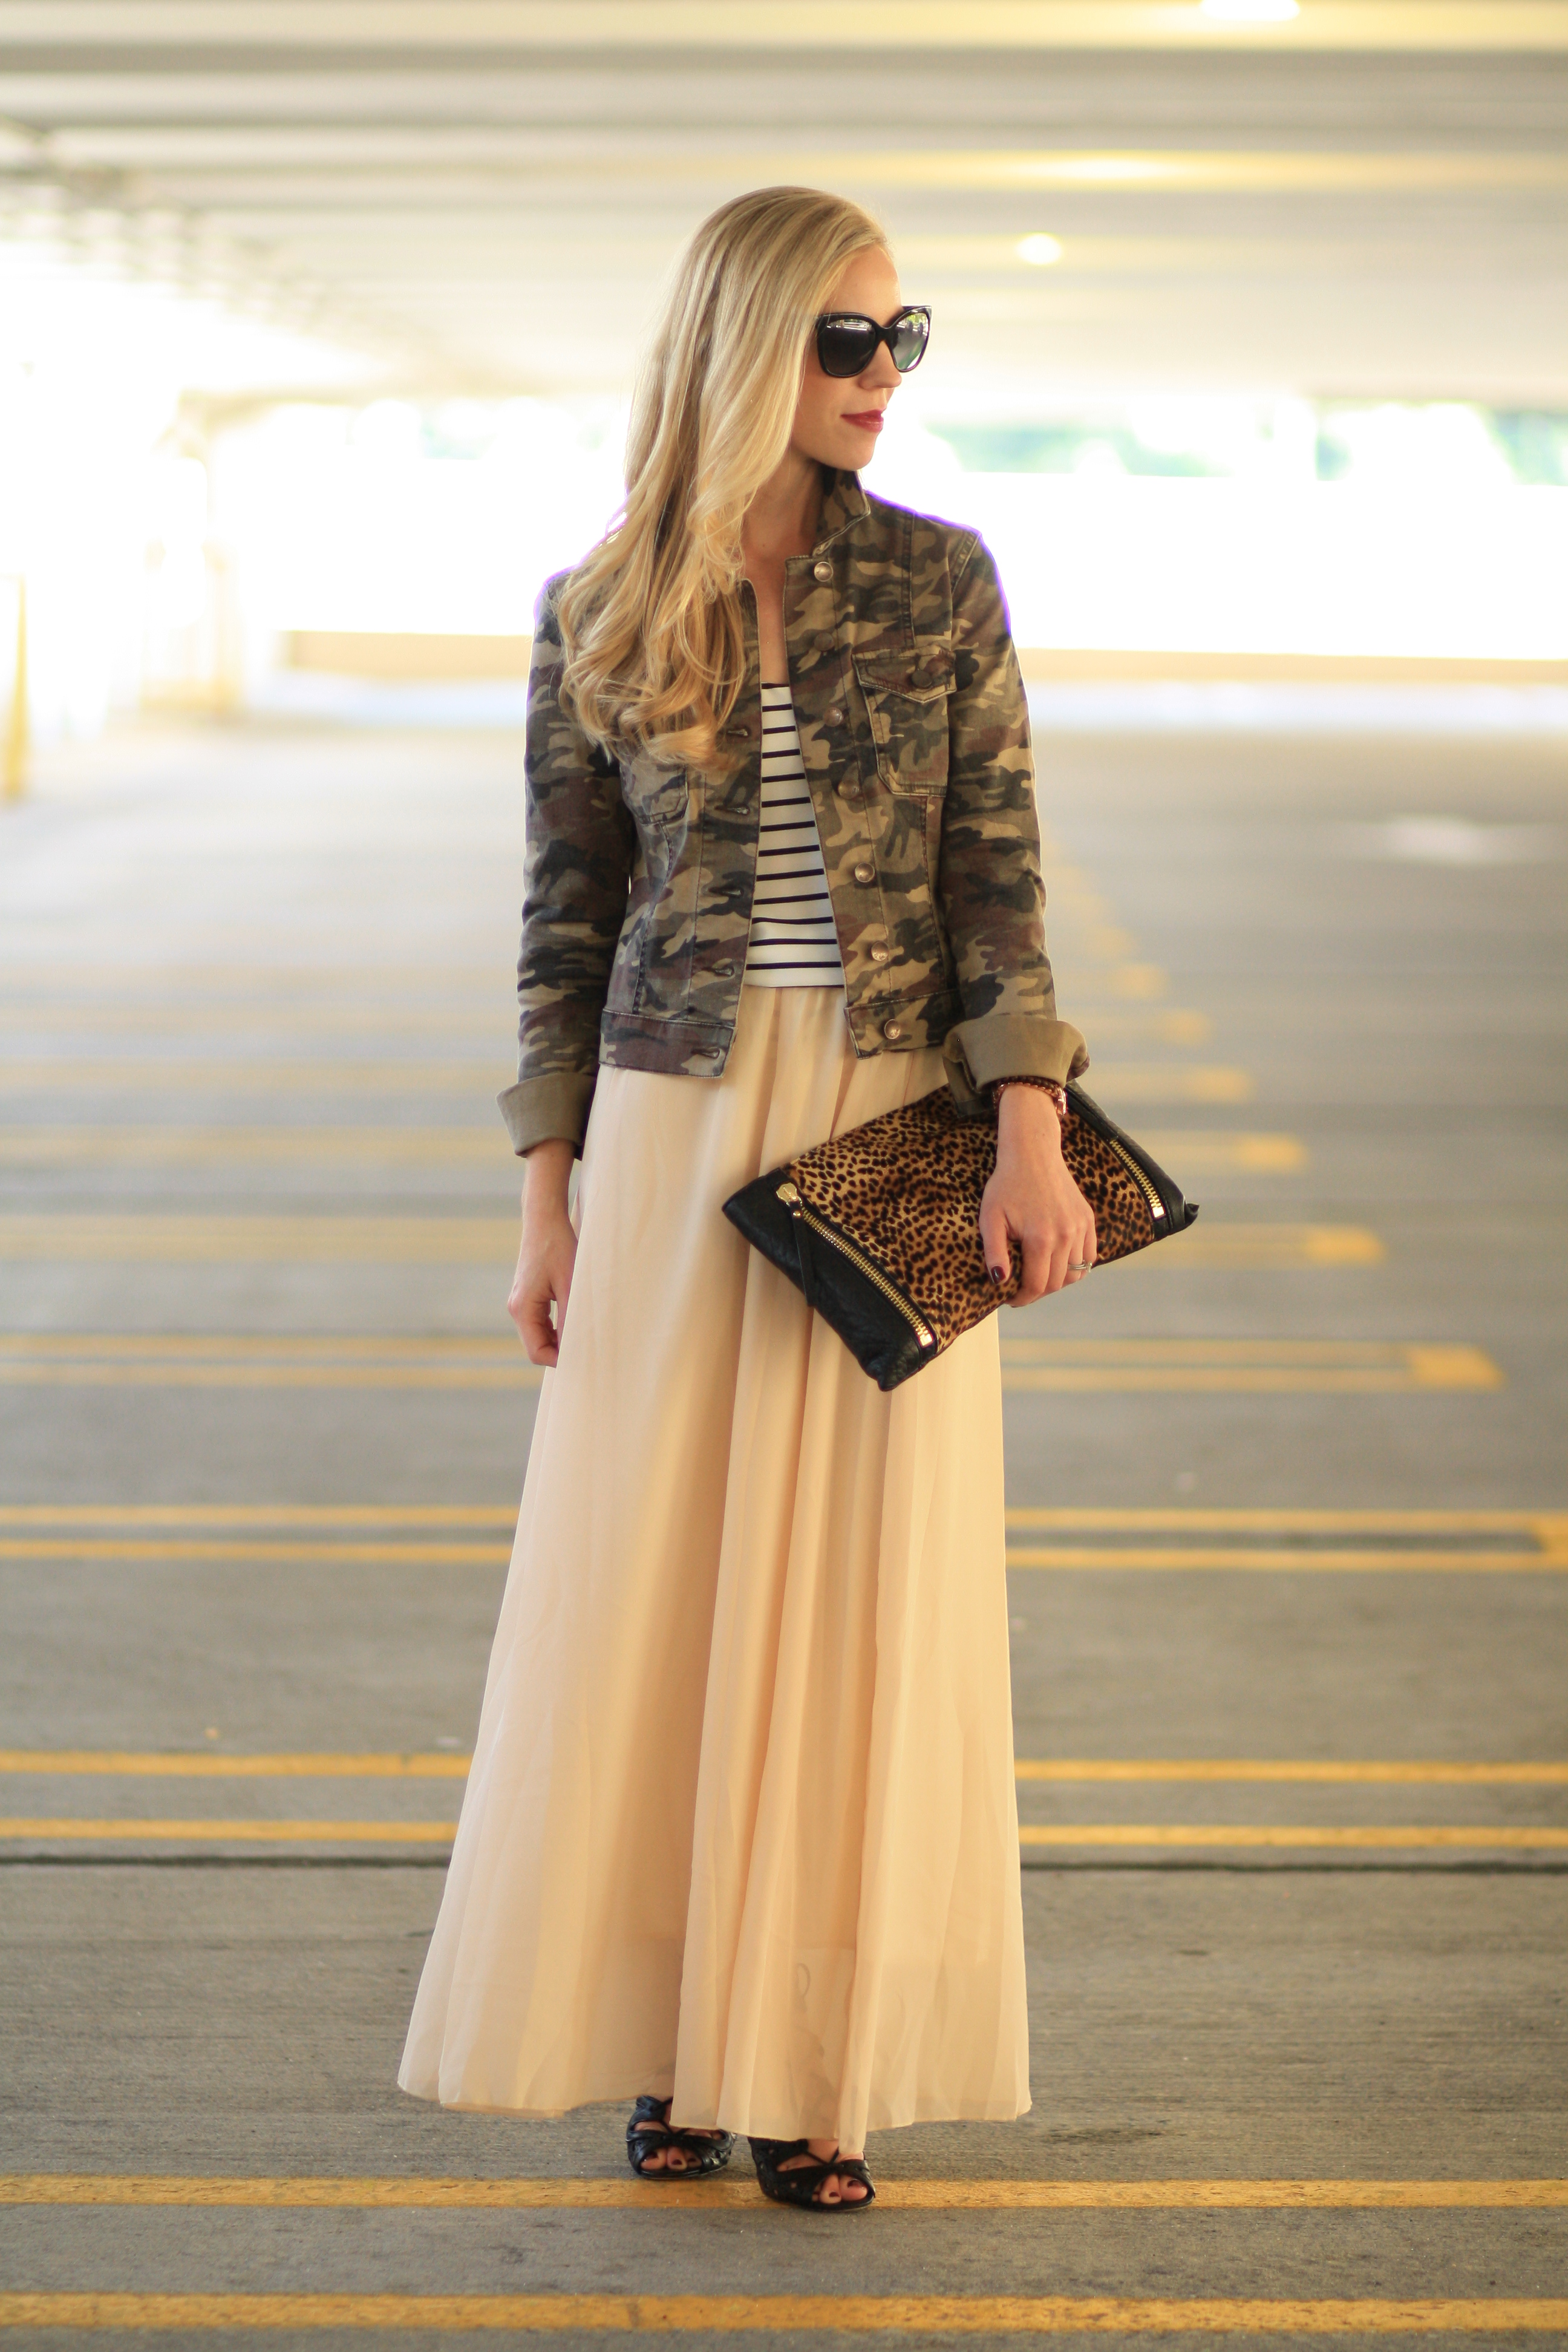 olive green cropped utility jacket, black and white striped silk tank,  flowy chiffon nude maxi skirt, black lace up booties, Vince Camuto leopard  clutch, Chanel cateye sunglasses - Meagan's Moda